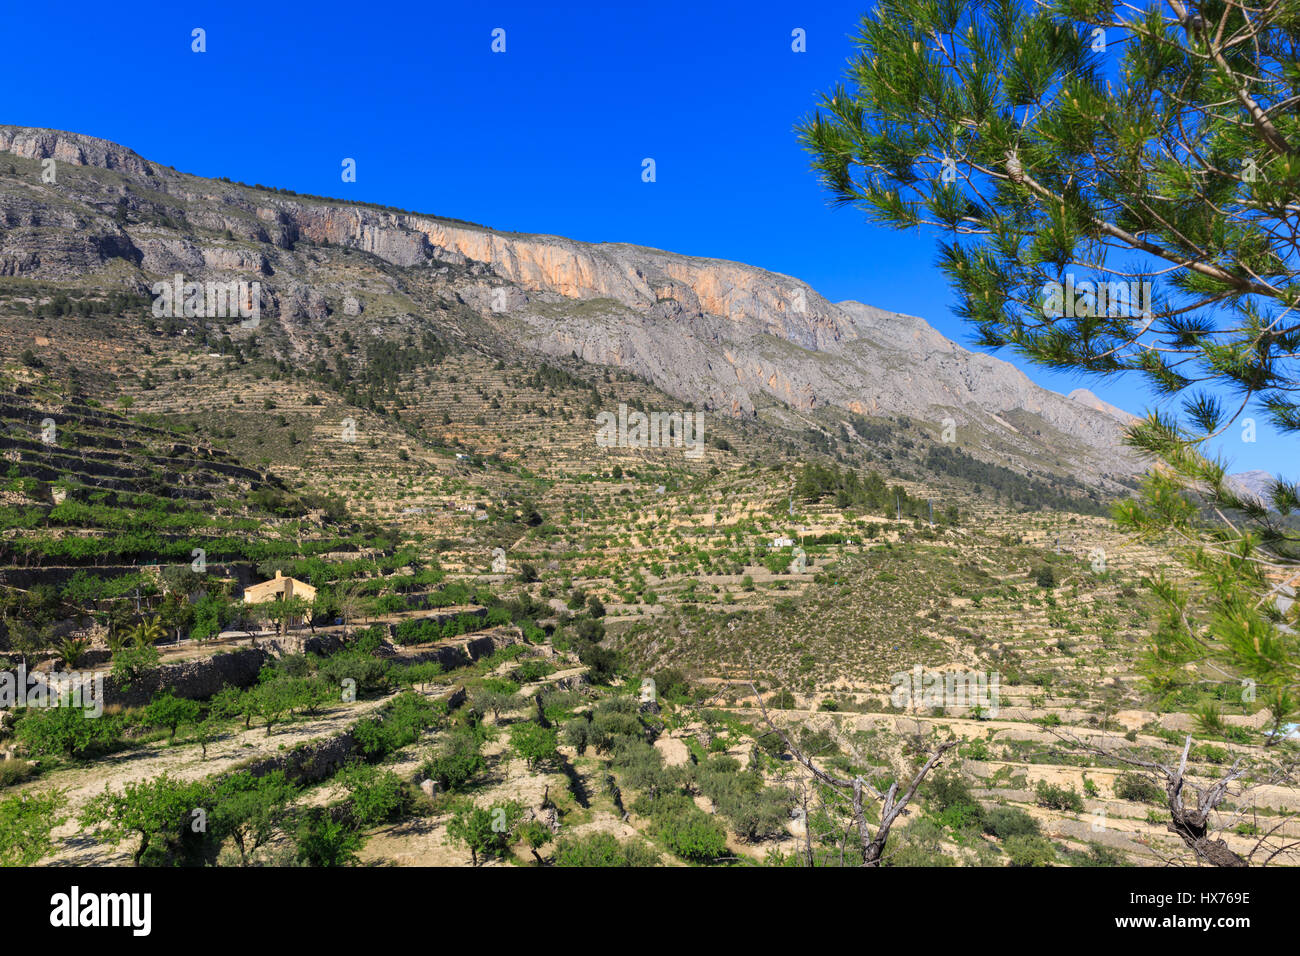 Terraced fruit trees and olive groves on a mountain side, Alicante Region, Costa Brava, Spain Stock Photo